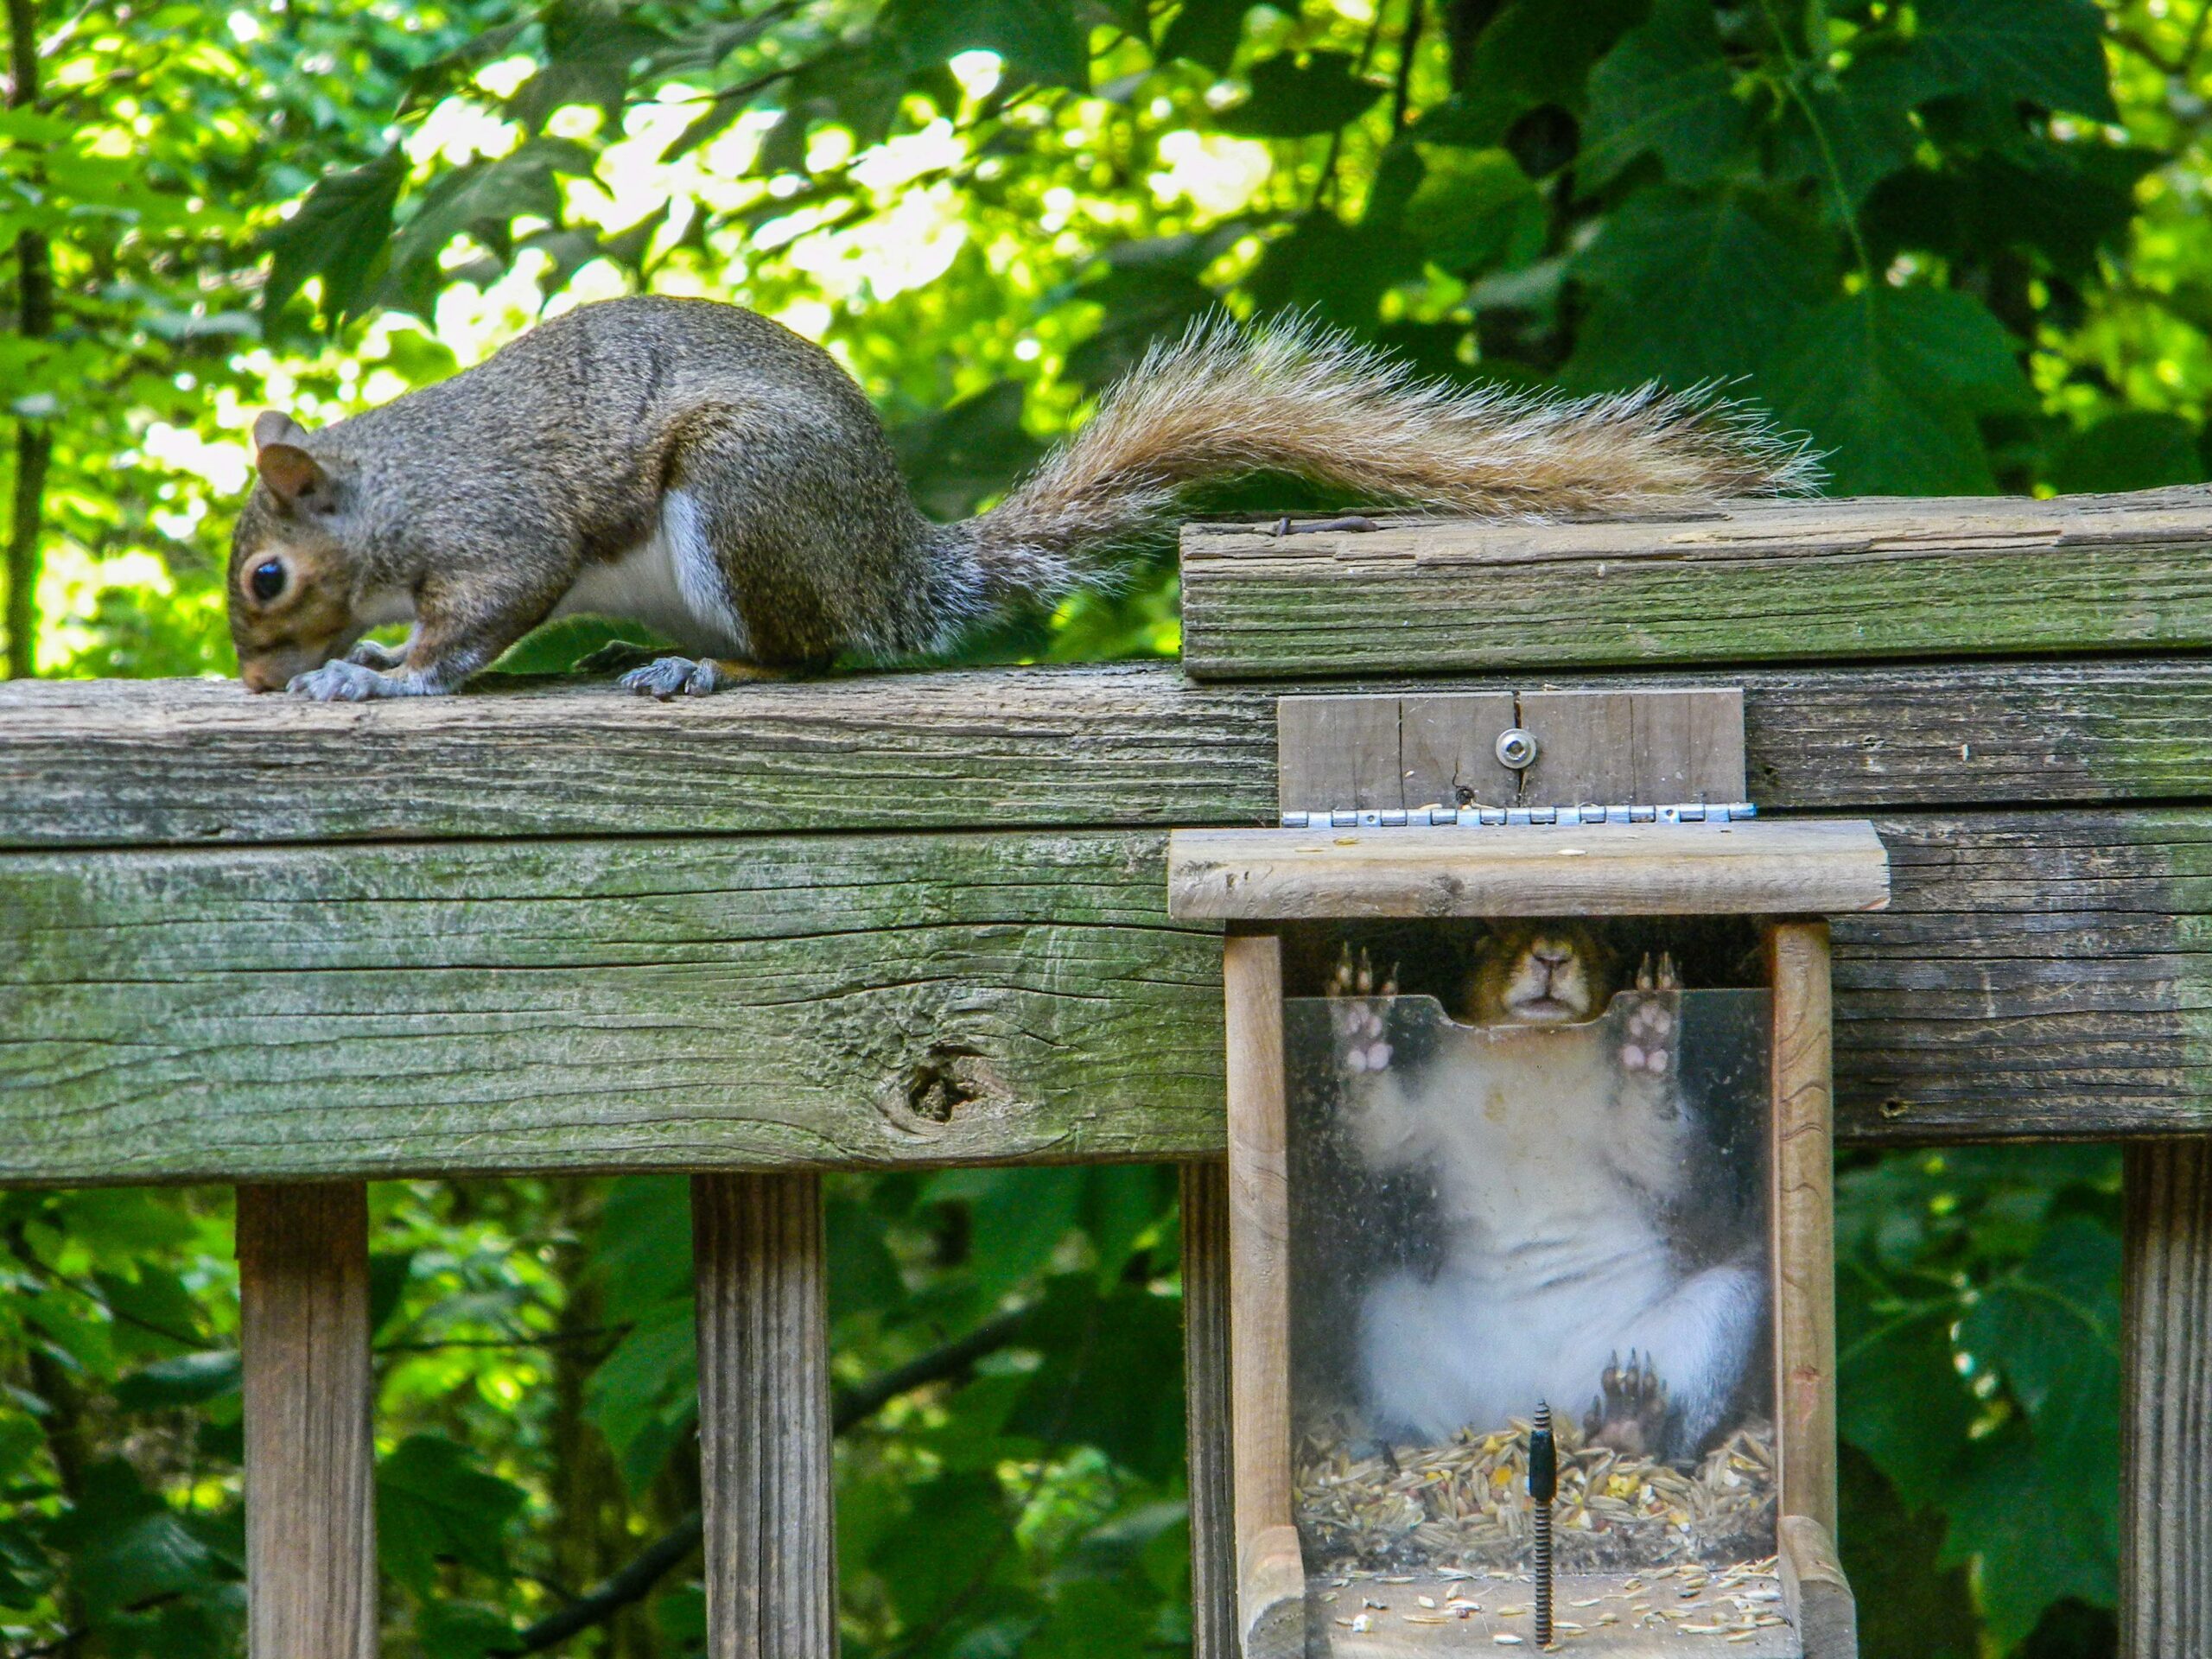 Two squirrels on a porch railing. One is stuck inside a bird feeder and can't get out.